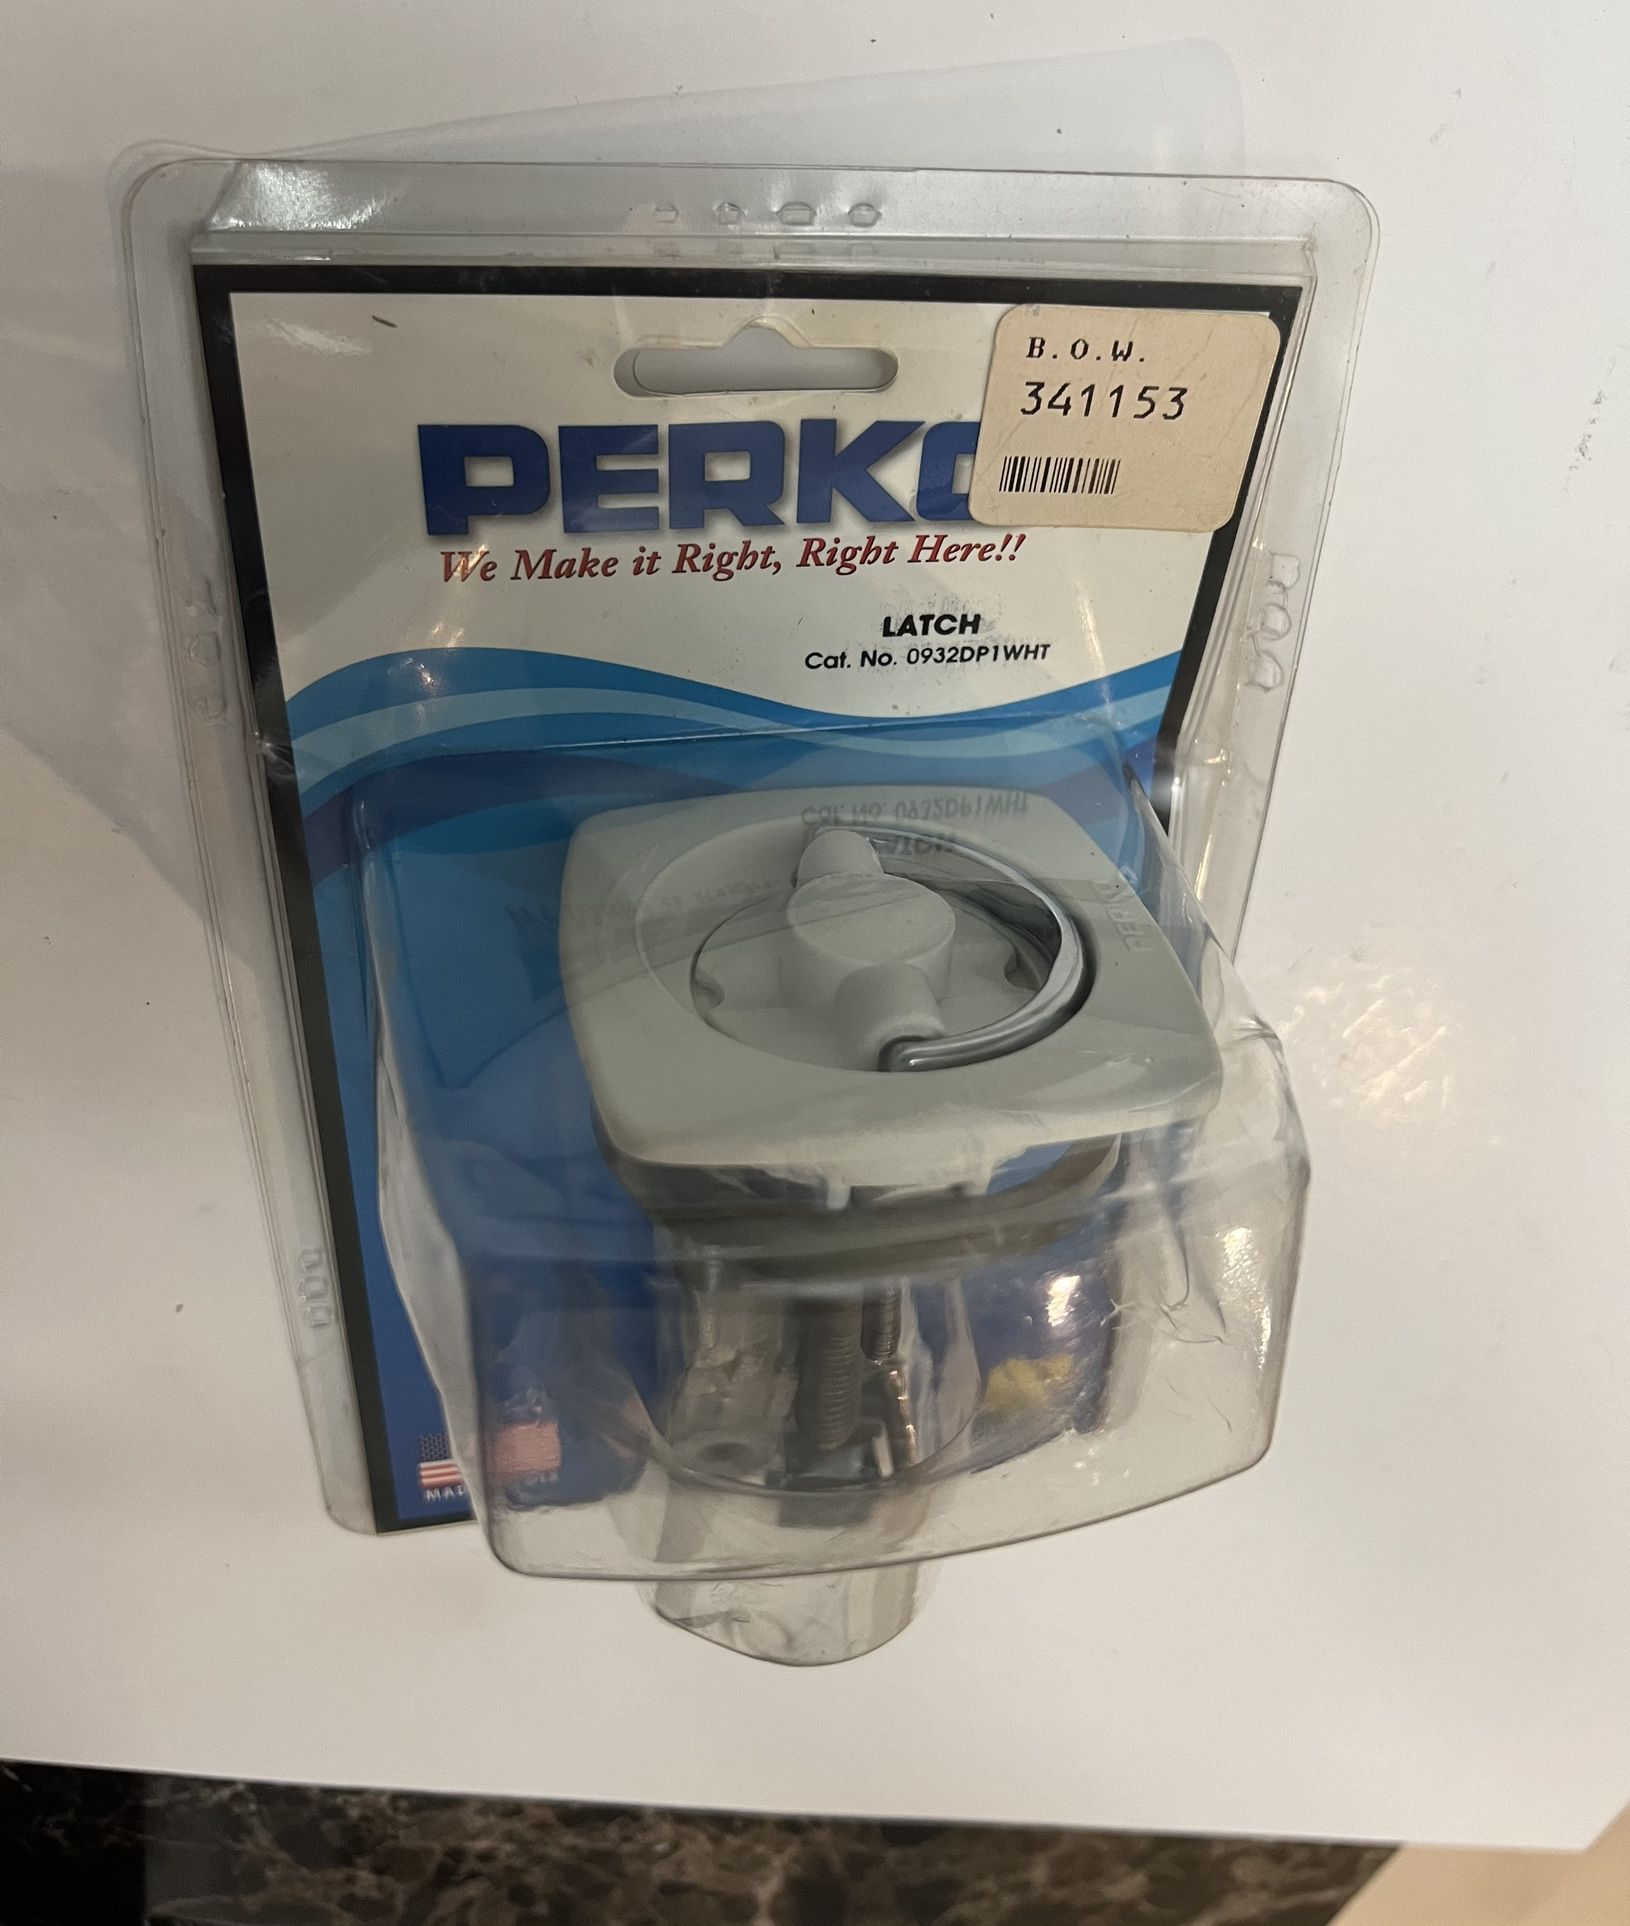 Perko 0932DP1WHT Flush-Mount Non-Locking Latch with Offset Cam Bar and Flexible Polymer Strike for 1-1/8" to 2" Hole - White